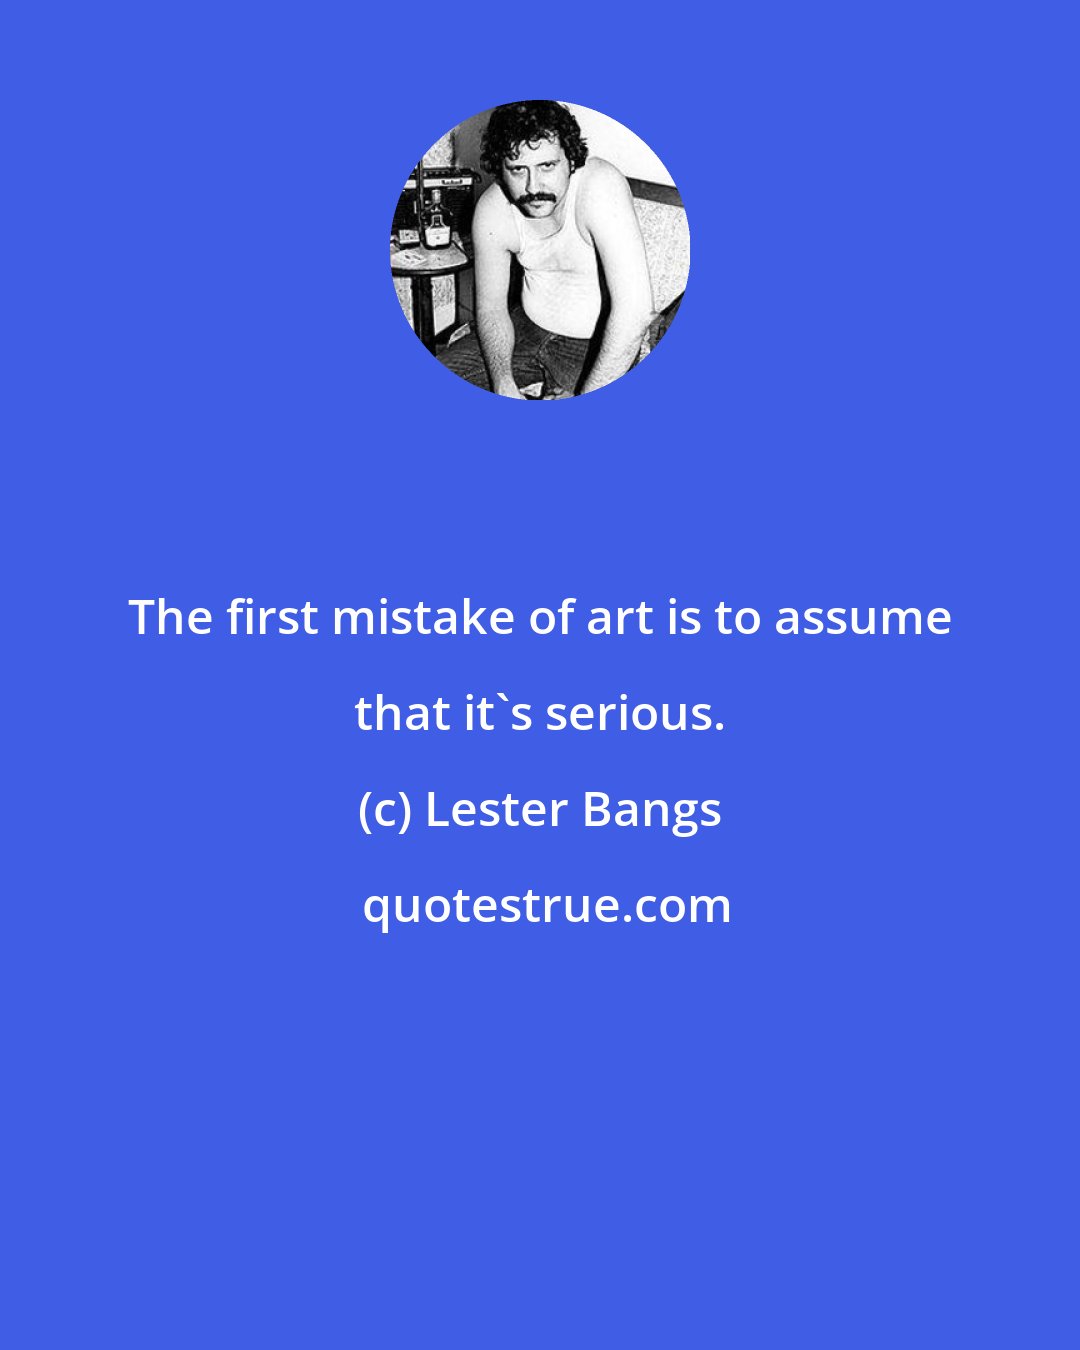 Lester Bangs: The first mistake of art is to assume that it's serious.